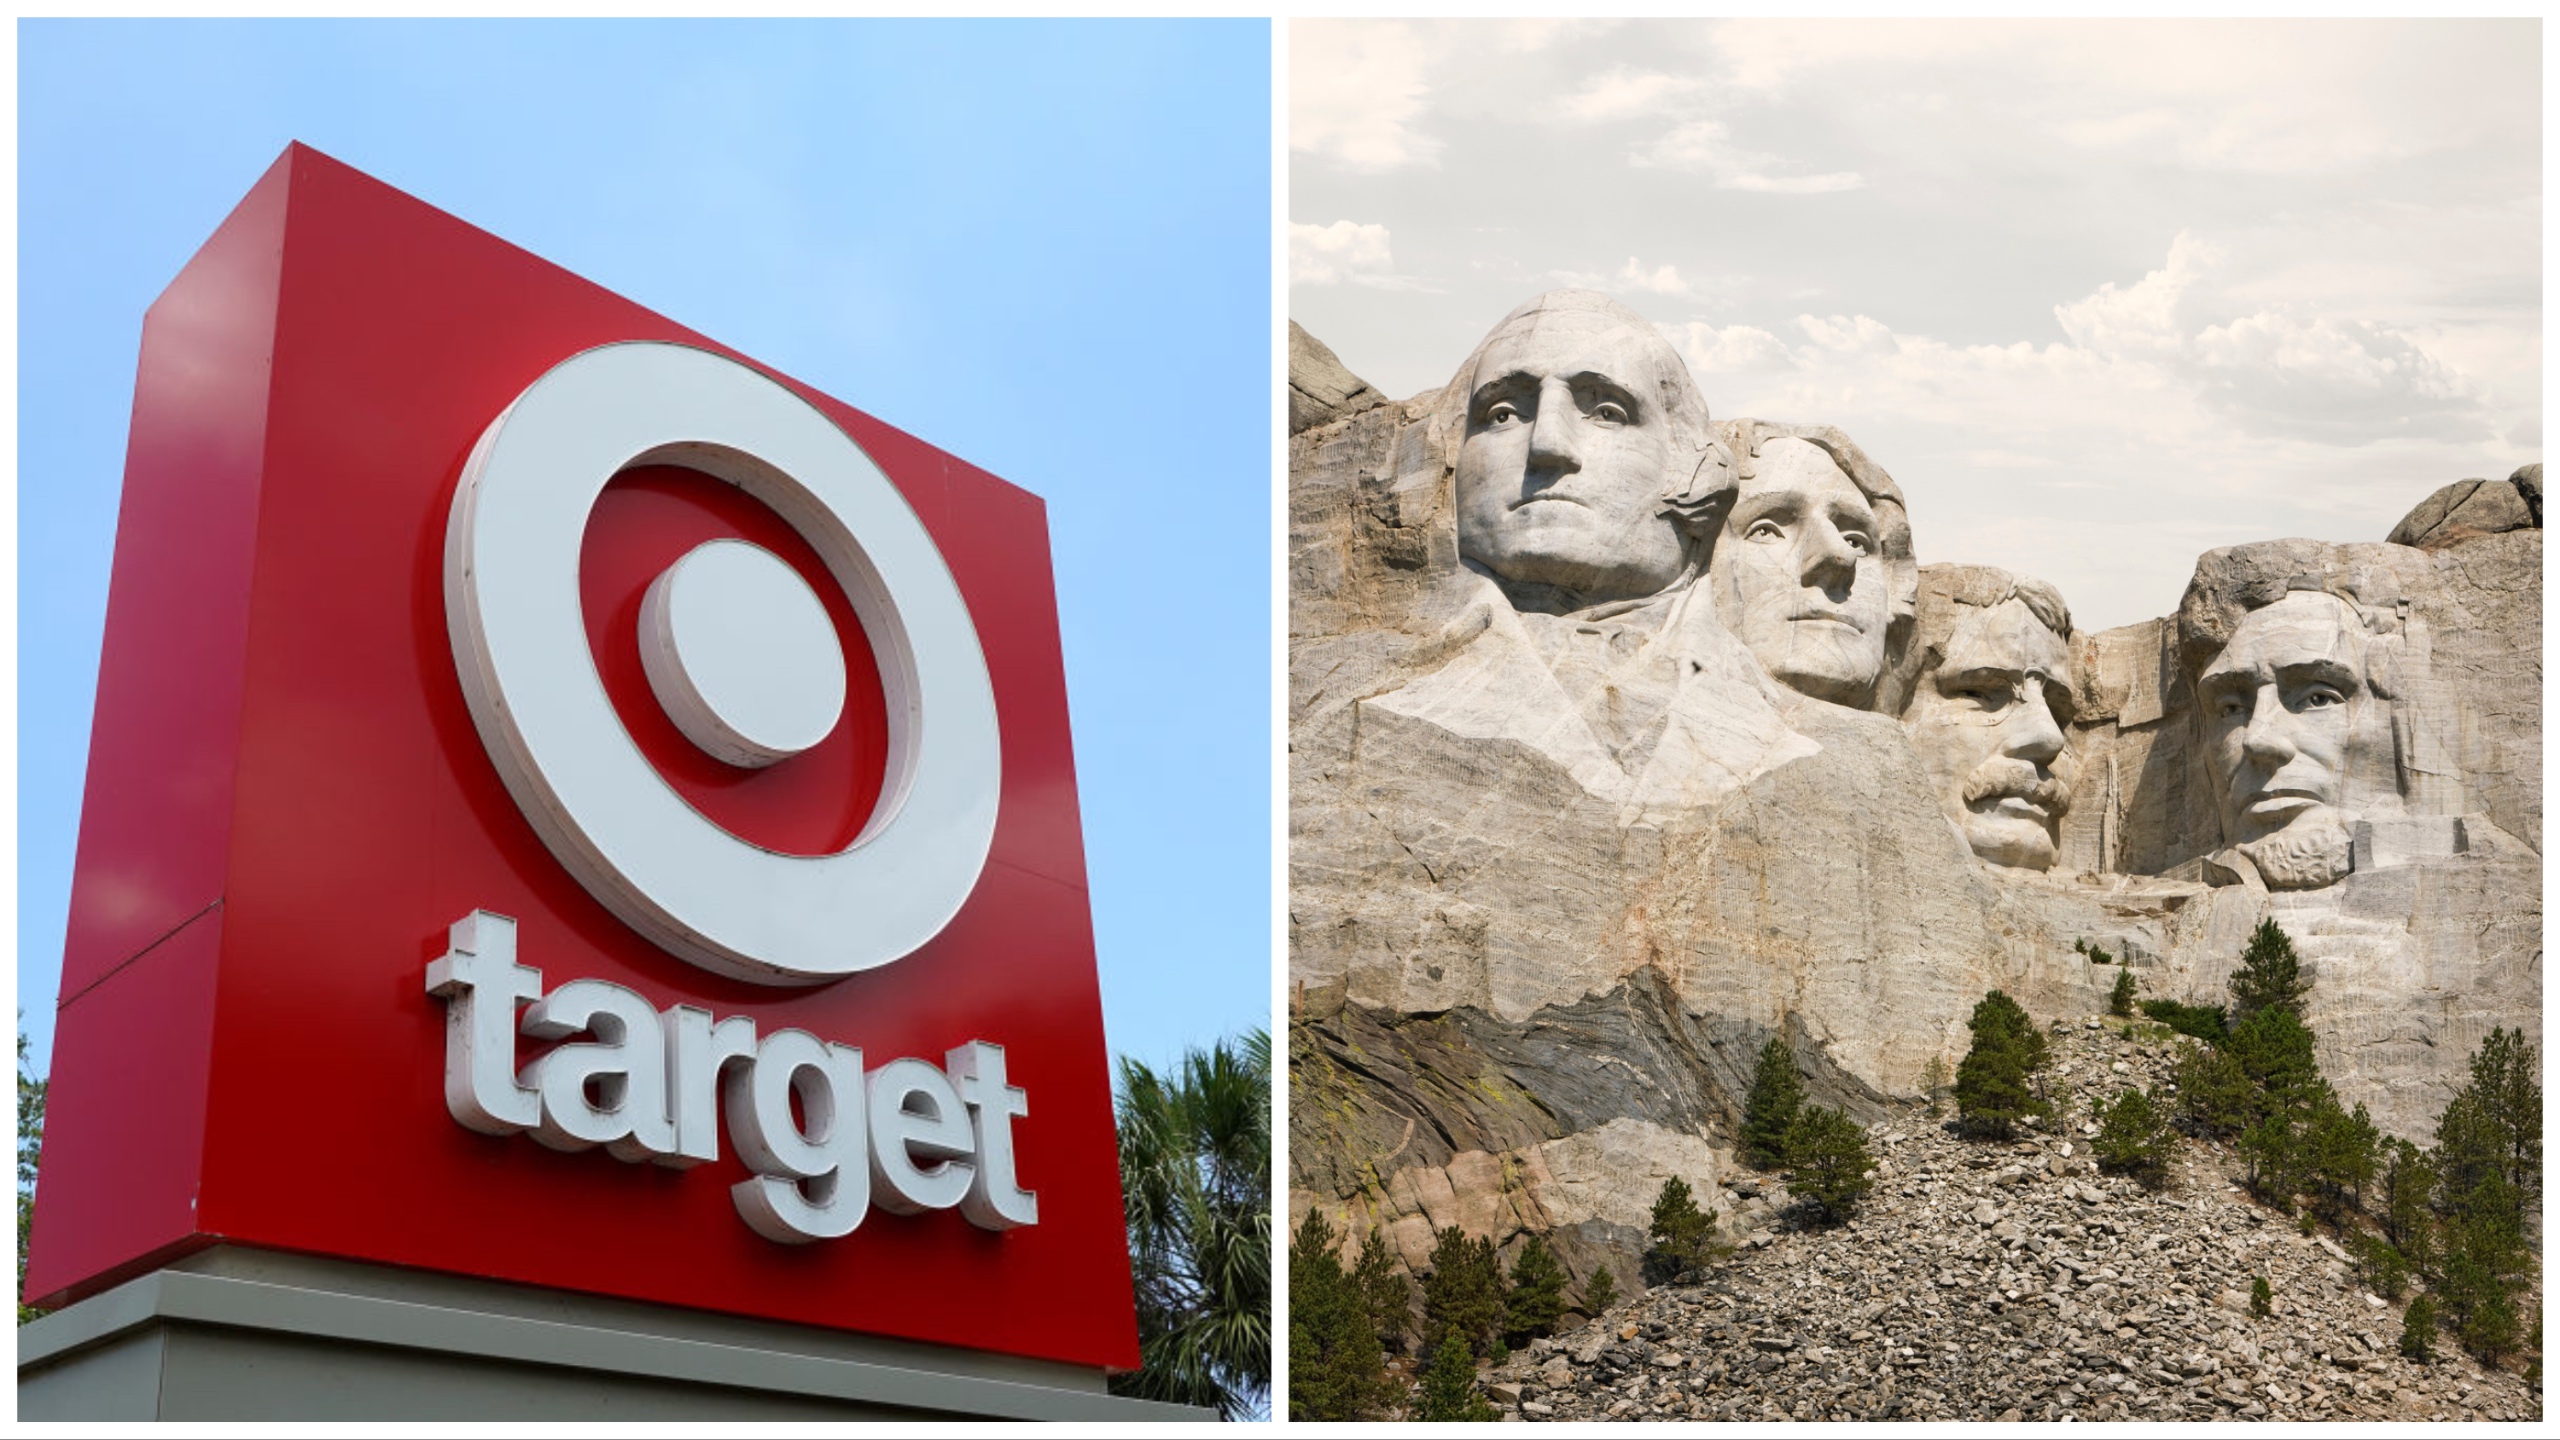 Target gave money to group wanting to close Mount Rushmore: Report.